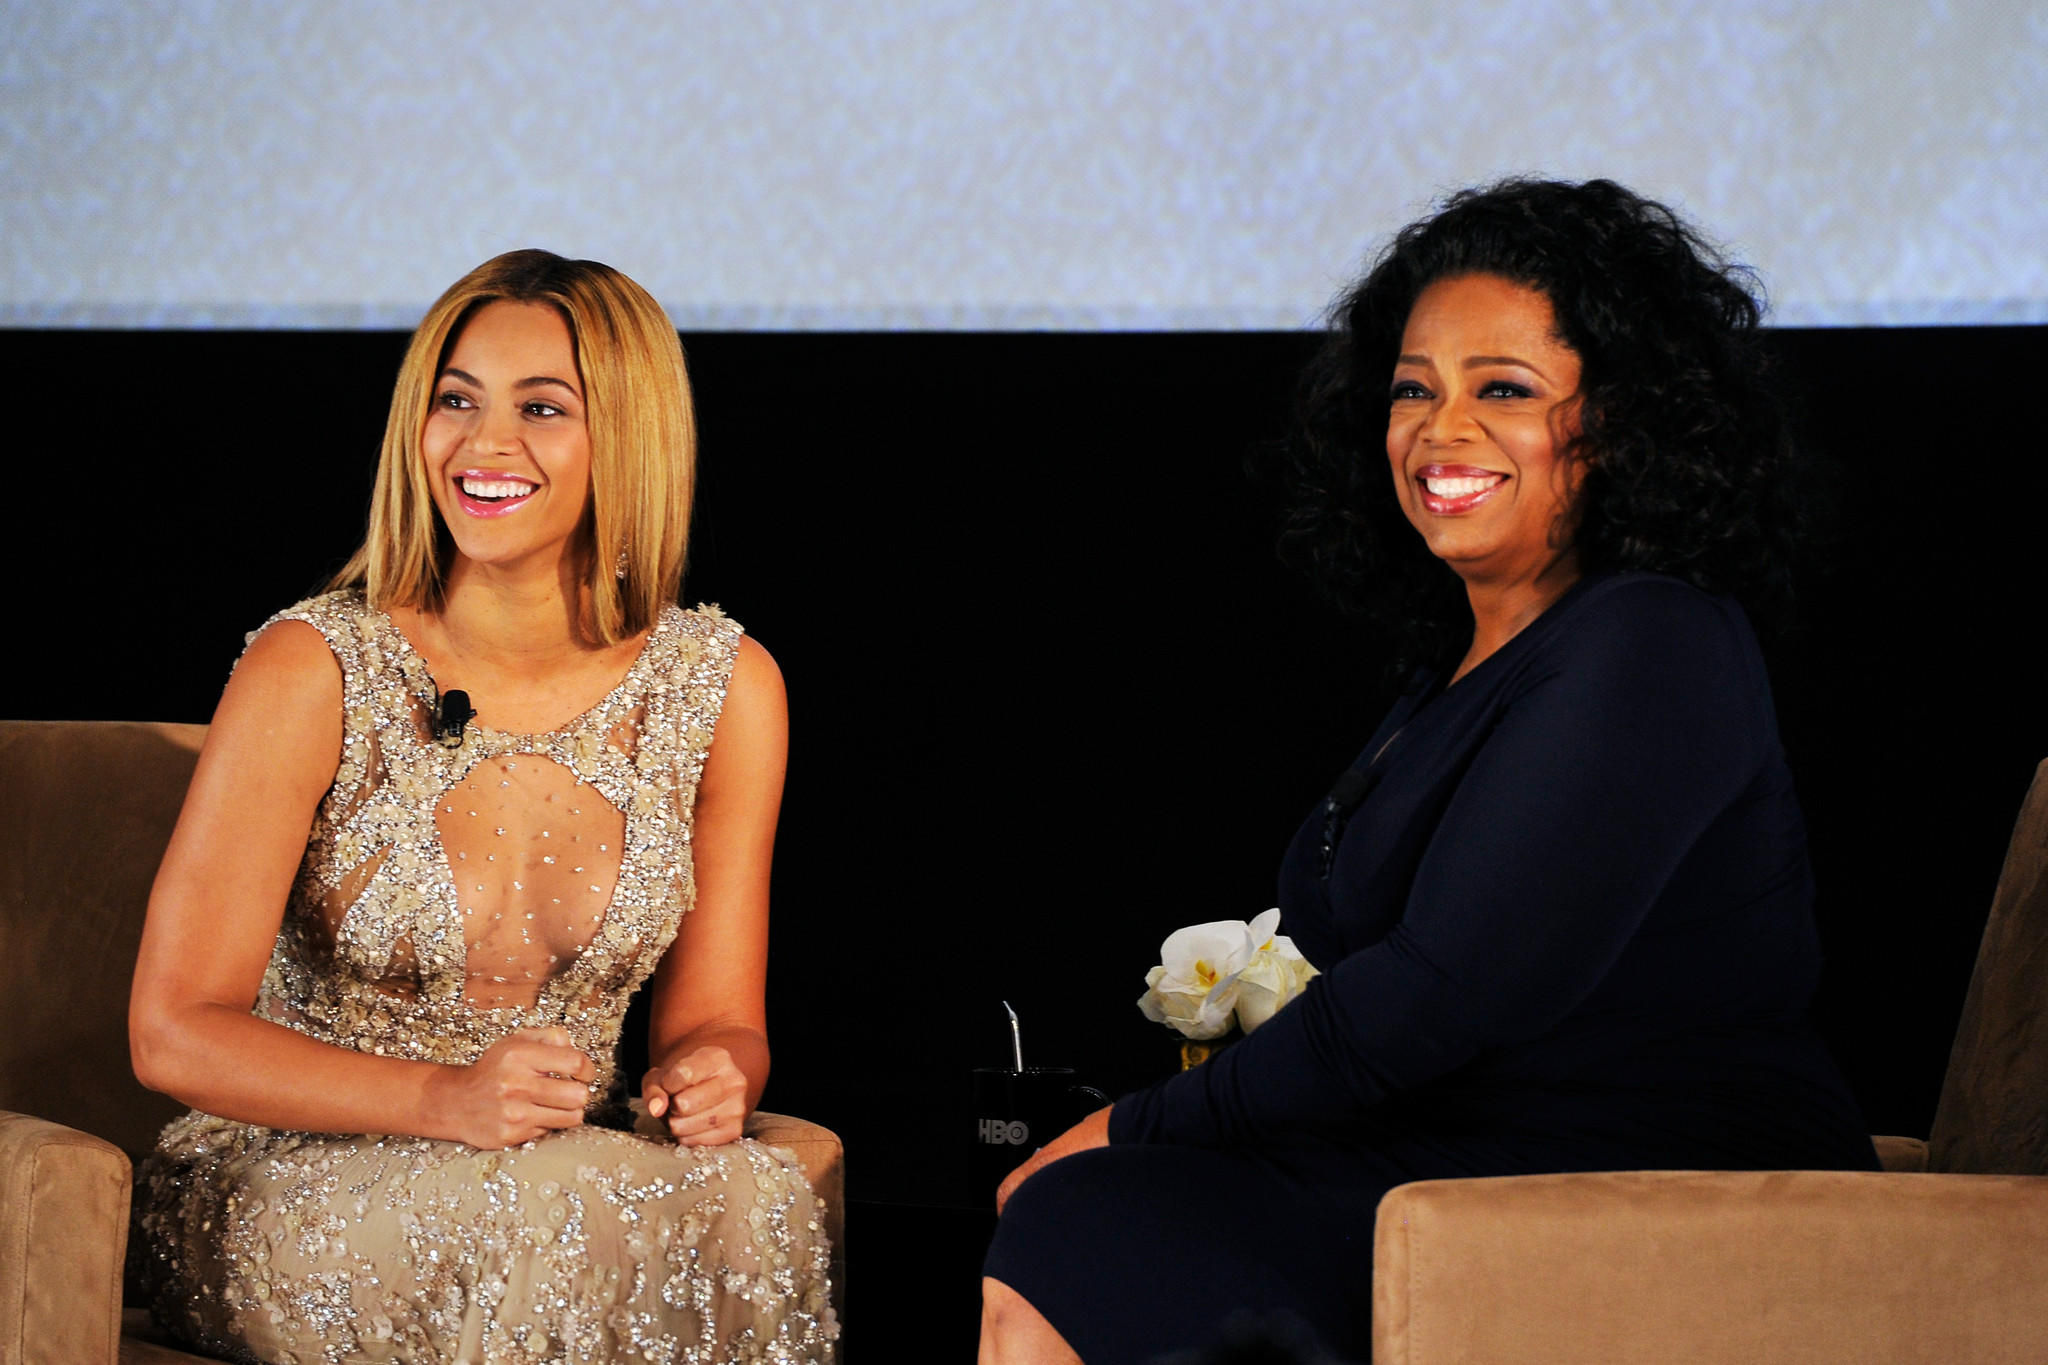 Beyoncé, left, and Oprah will join other celebrities in an hourlong fundraiser for Hurricane Harvey relief. (Larry Busacca / Getty Images)